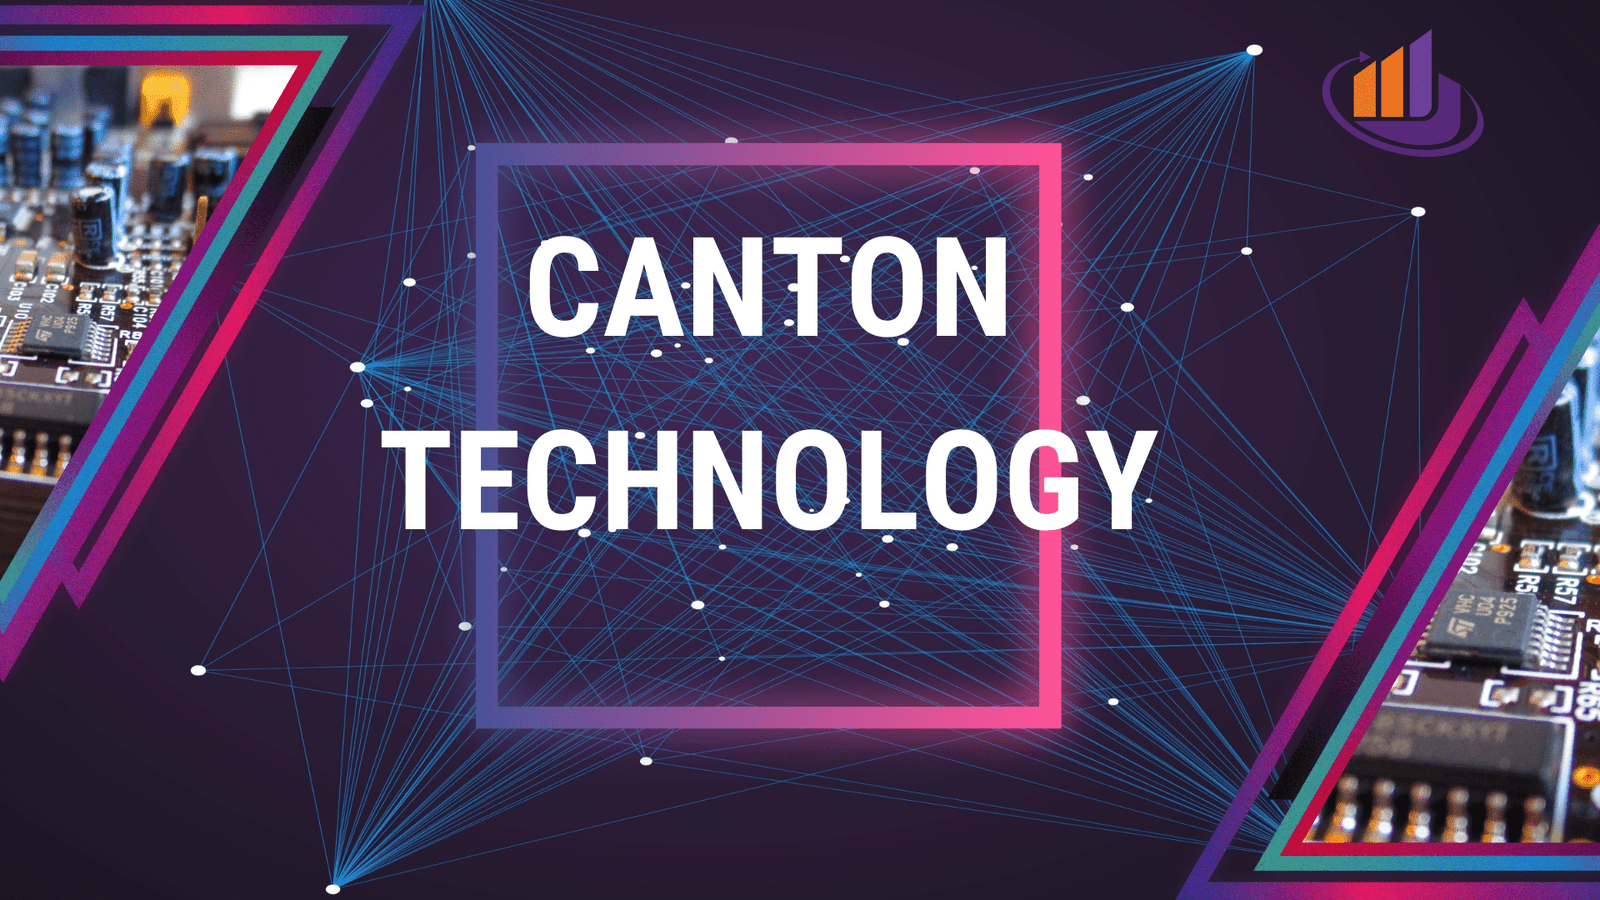 Canton Technology refers to a Chinese high-tech industrial area that is situated in (the Pearl River Delta) Guangzhou. It is a hub of various technology companies that involve great industrial innovations and powers.